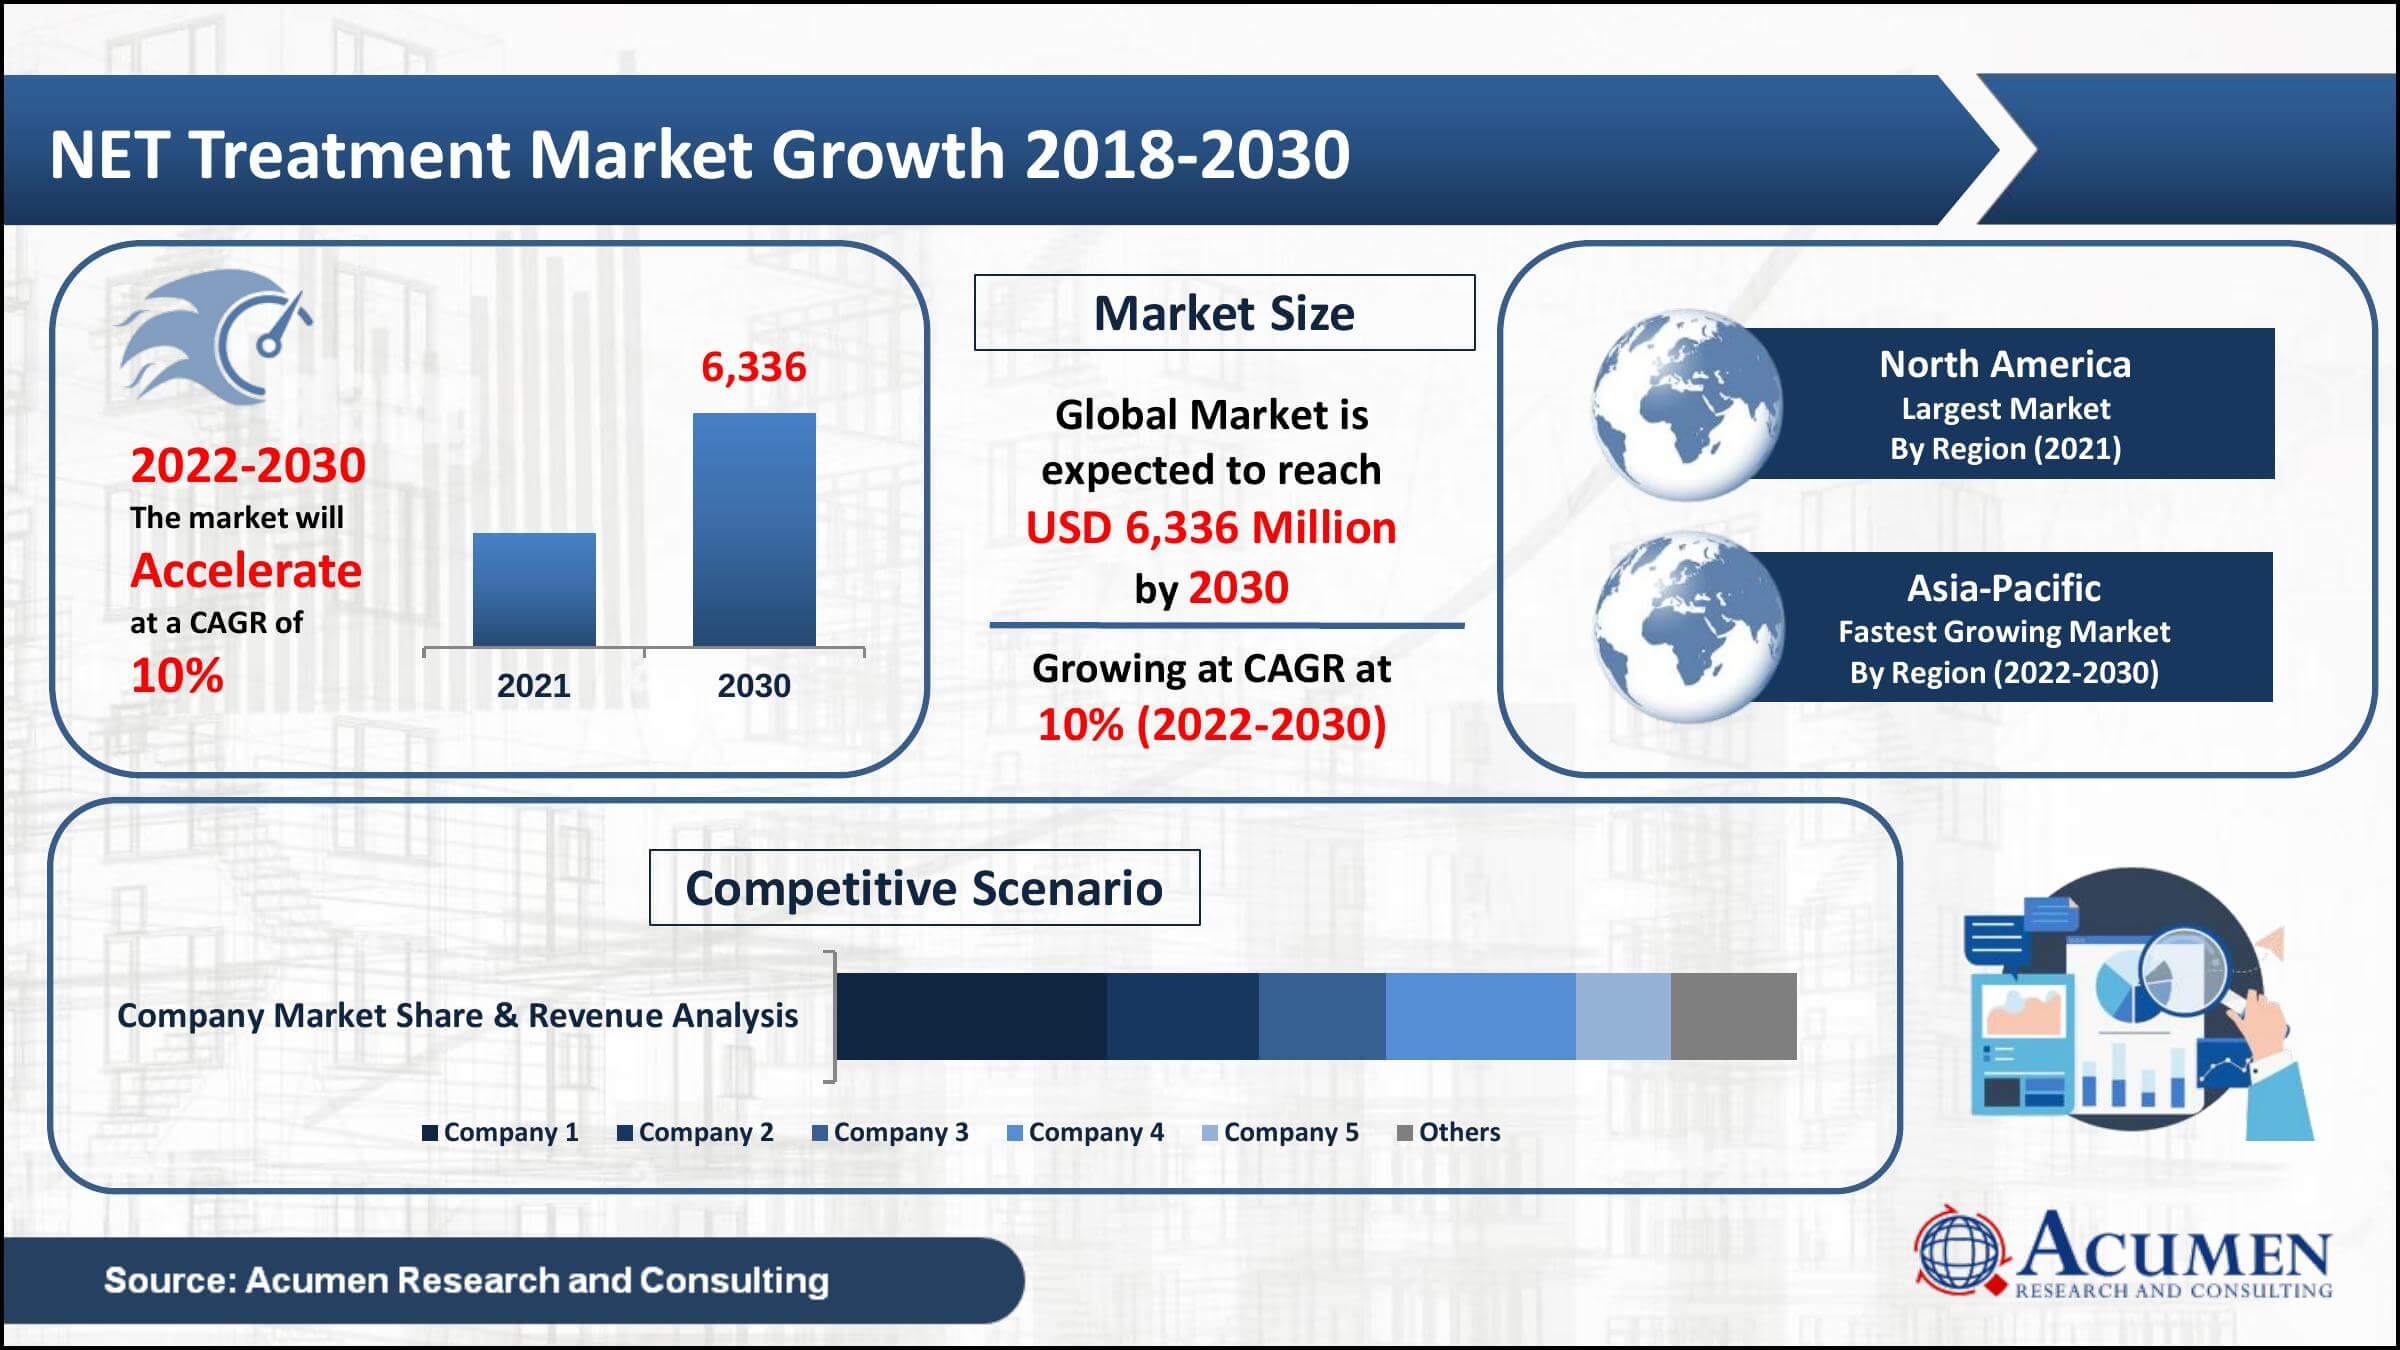 NET treatment market revenue collected USD 2,741 Million in 2021, with a 10% CAGR between 2022 and 2030